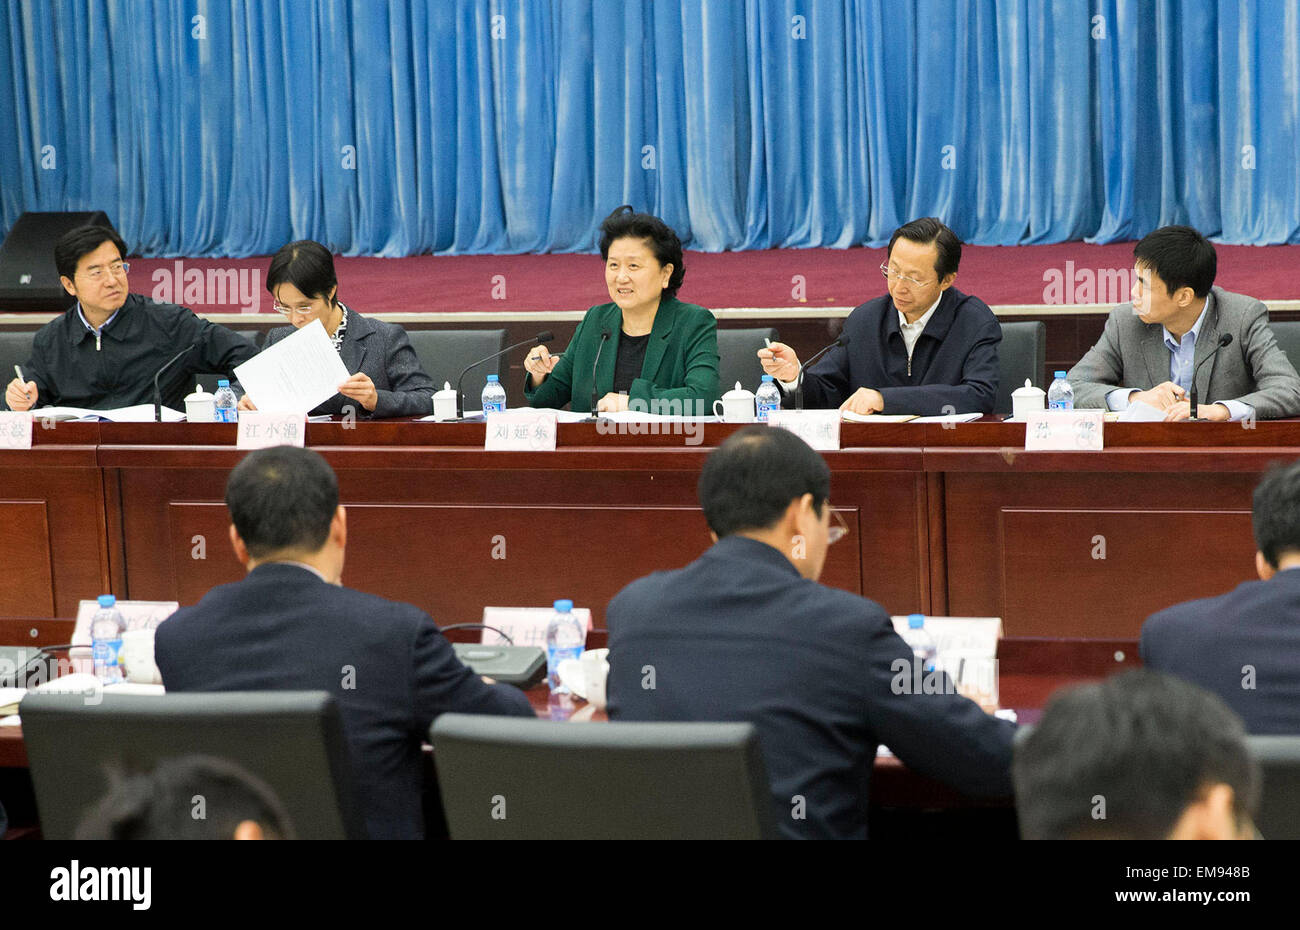 Beijing, China. 17th Apr, 2015. Chinese Vice Premier Liu Yandong (back C) speaks at a symposium about agricultural science and technology innovation in Beijing, capital of China, April 17, 2015. © Huang Jingwen/Xinhua/Alamy Live News Stock Photo